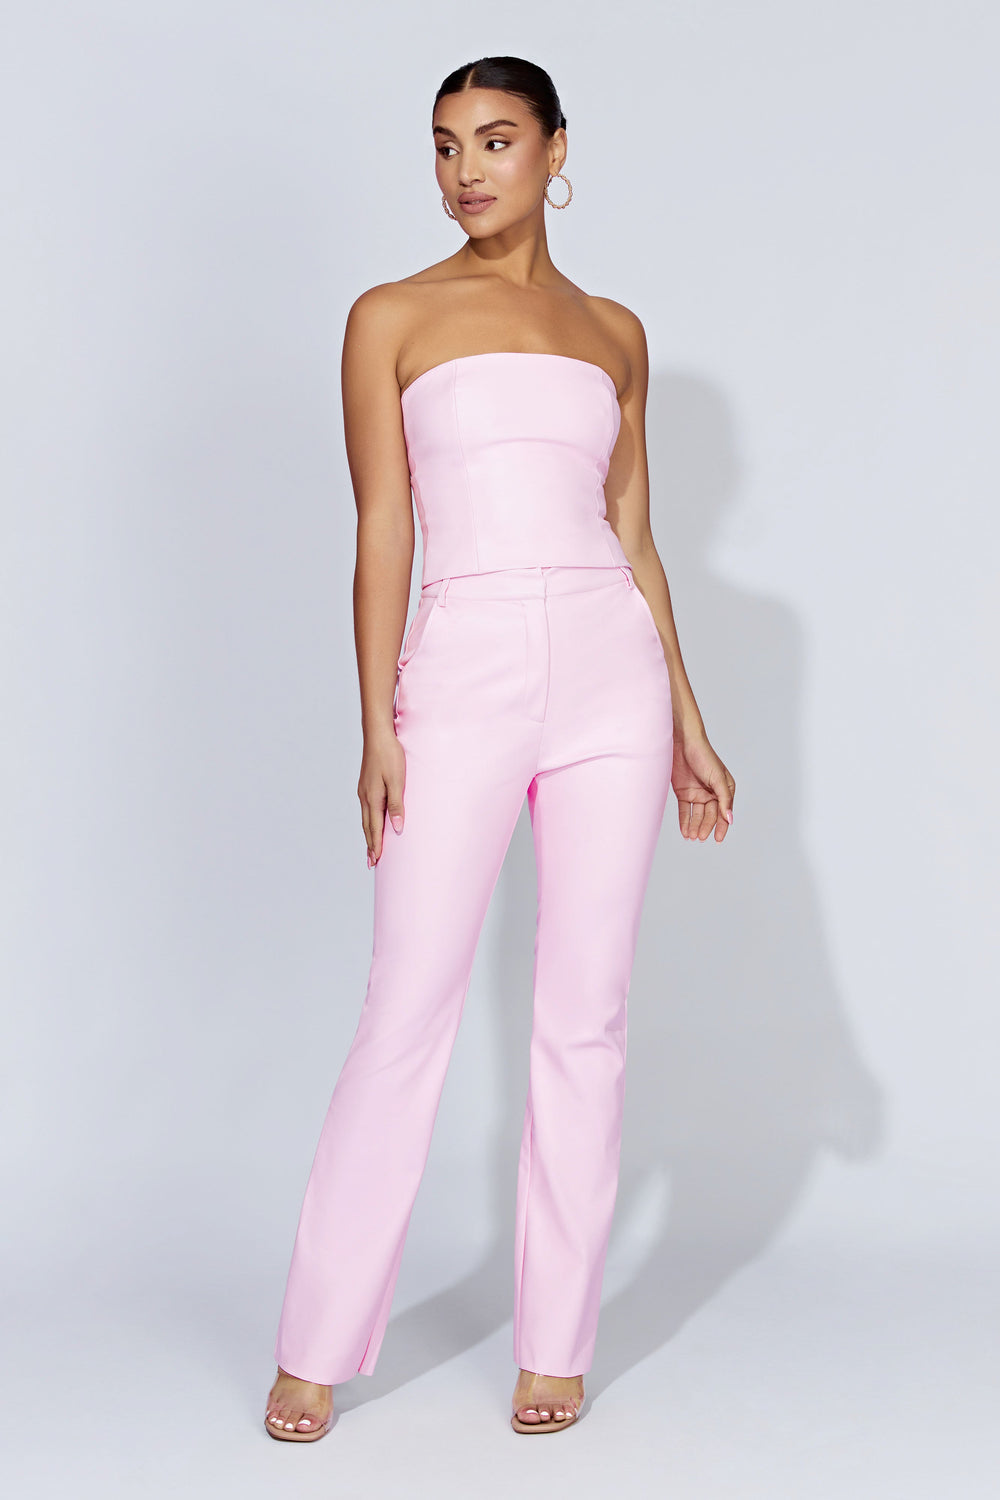 Tyra Straight Leg Faux Leather Pants - Baby Pink